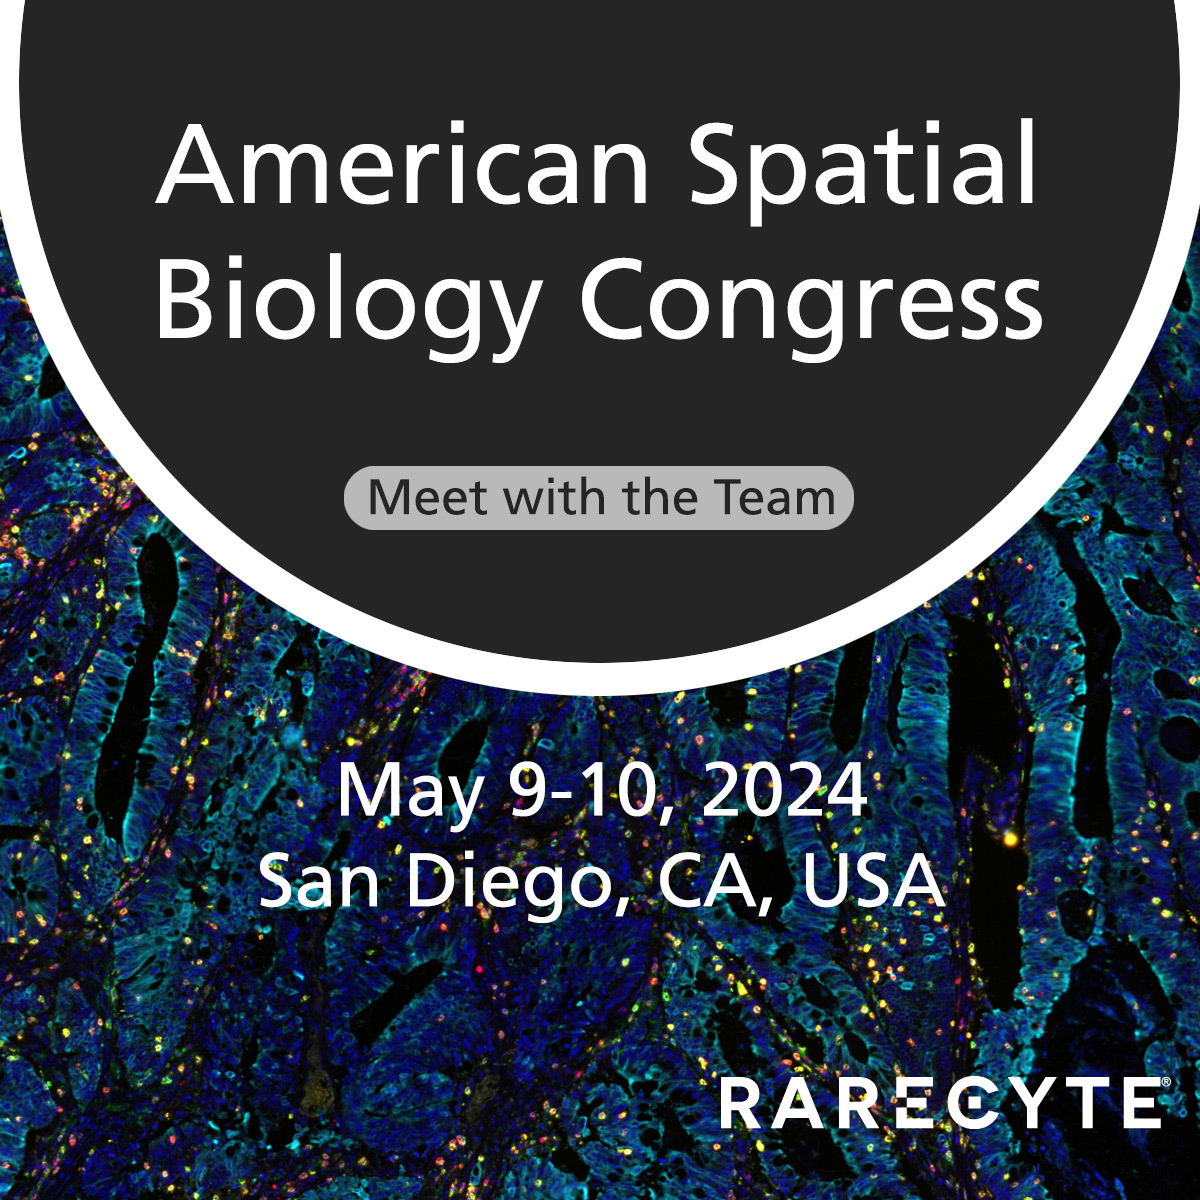 Heading to American Spatial Biology Congress? Connect with our team if you are considering spatial imaging technologies. Learn about Orion, rarecyte.com/orion/?utm_sou….

#spatialbiologycongressUS #spatialbiology #biomarkers #rarecyte